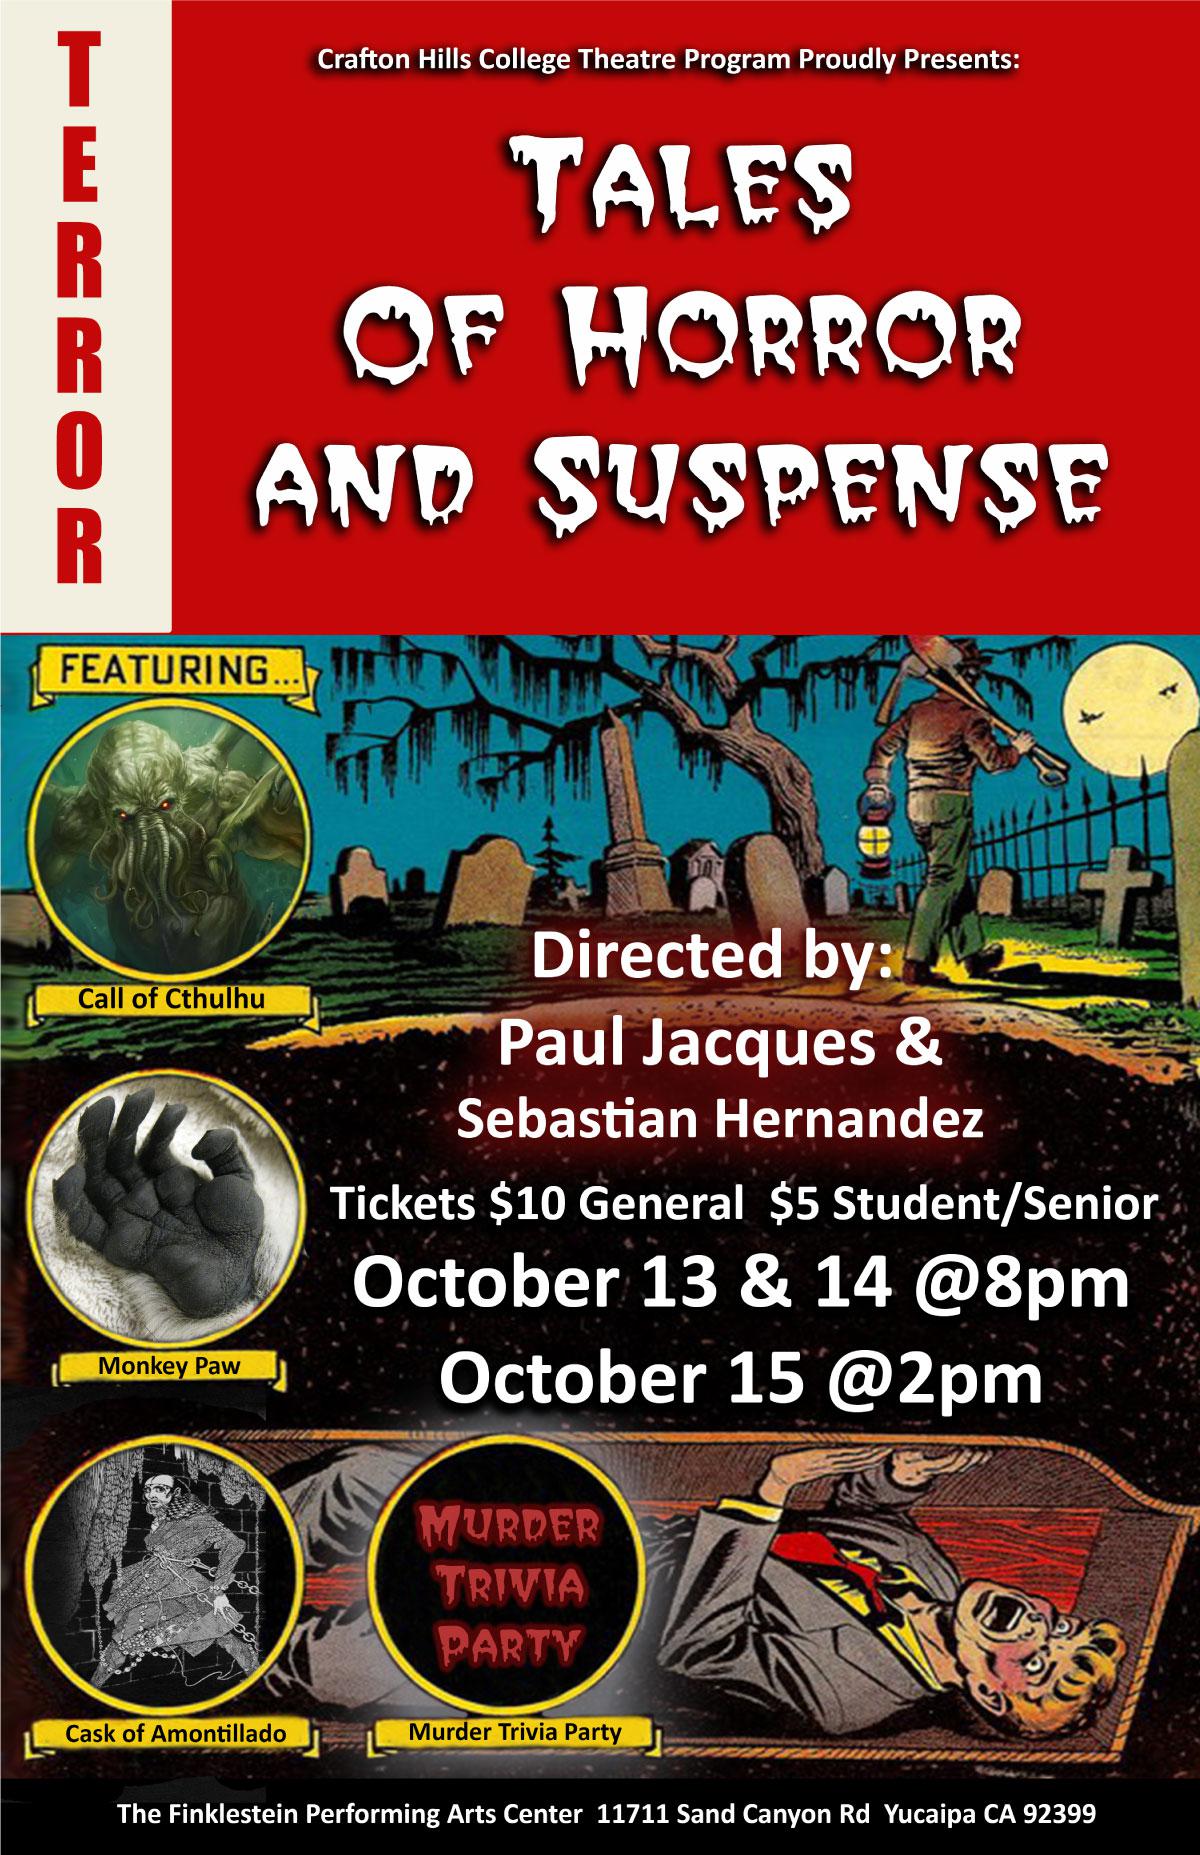 Tales of Horror Poster: Featuring Call of Cthulu, Monkey's Paw, Cask of Amontillado, and Murder Triva Party